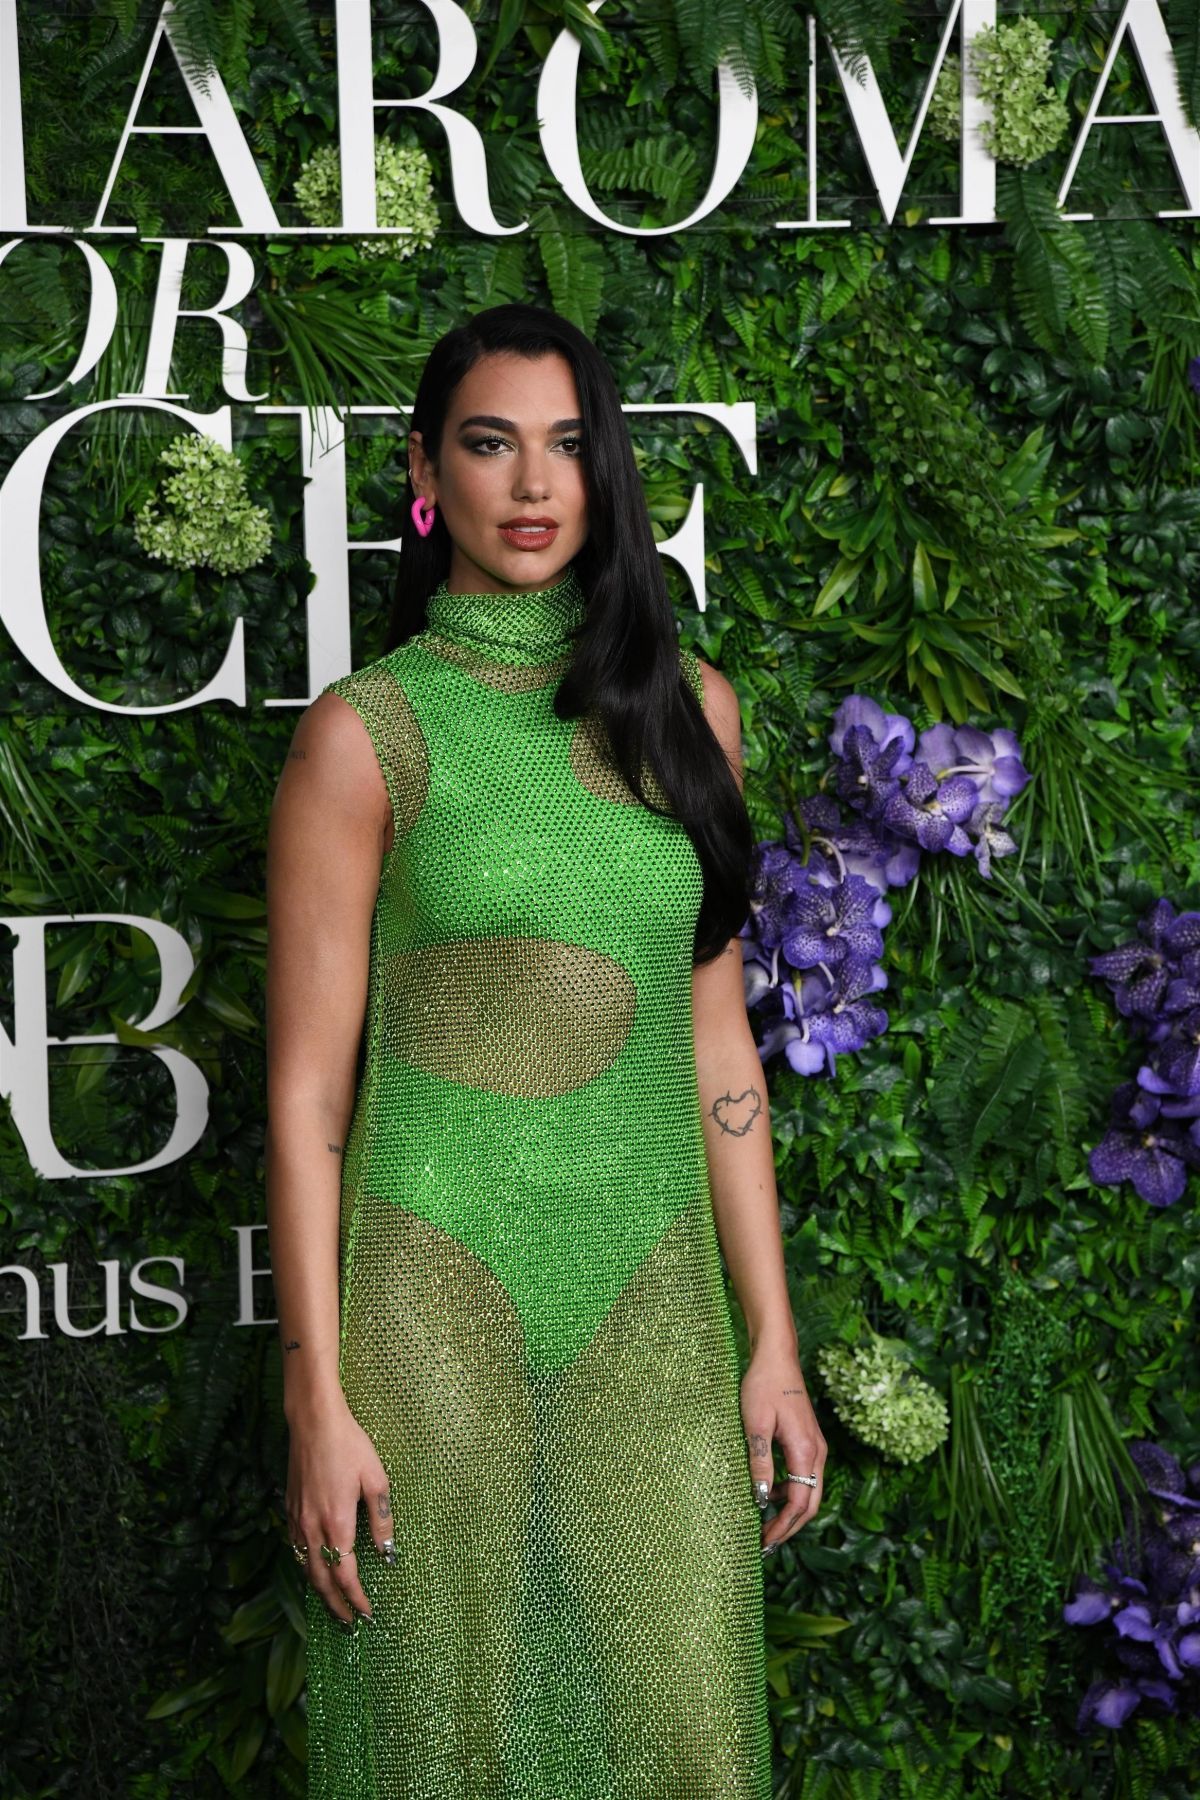 Hollywood Celebrity Sexy Style Wears a whimsical Lime Green